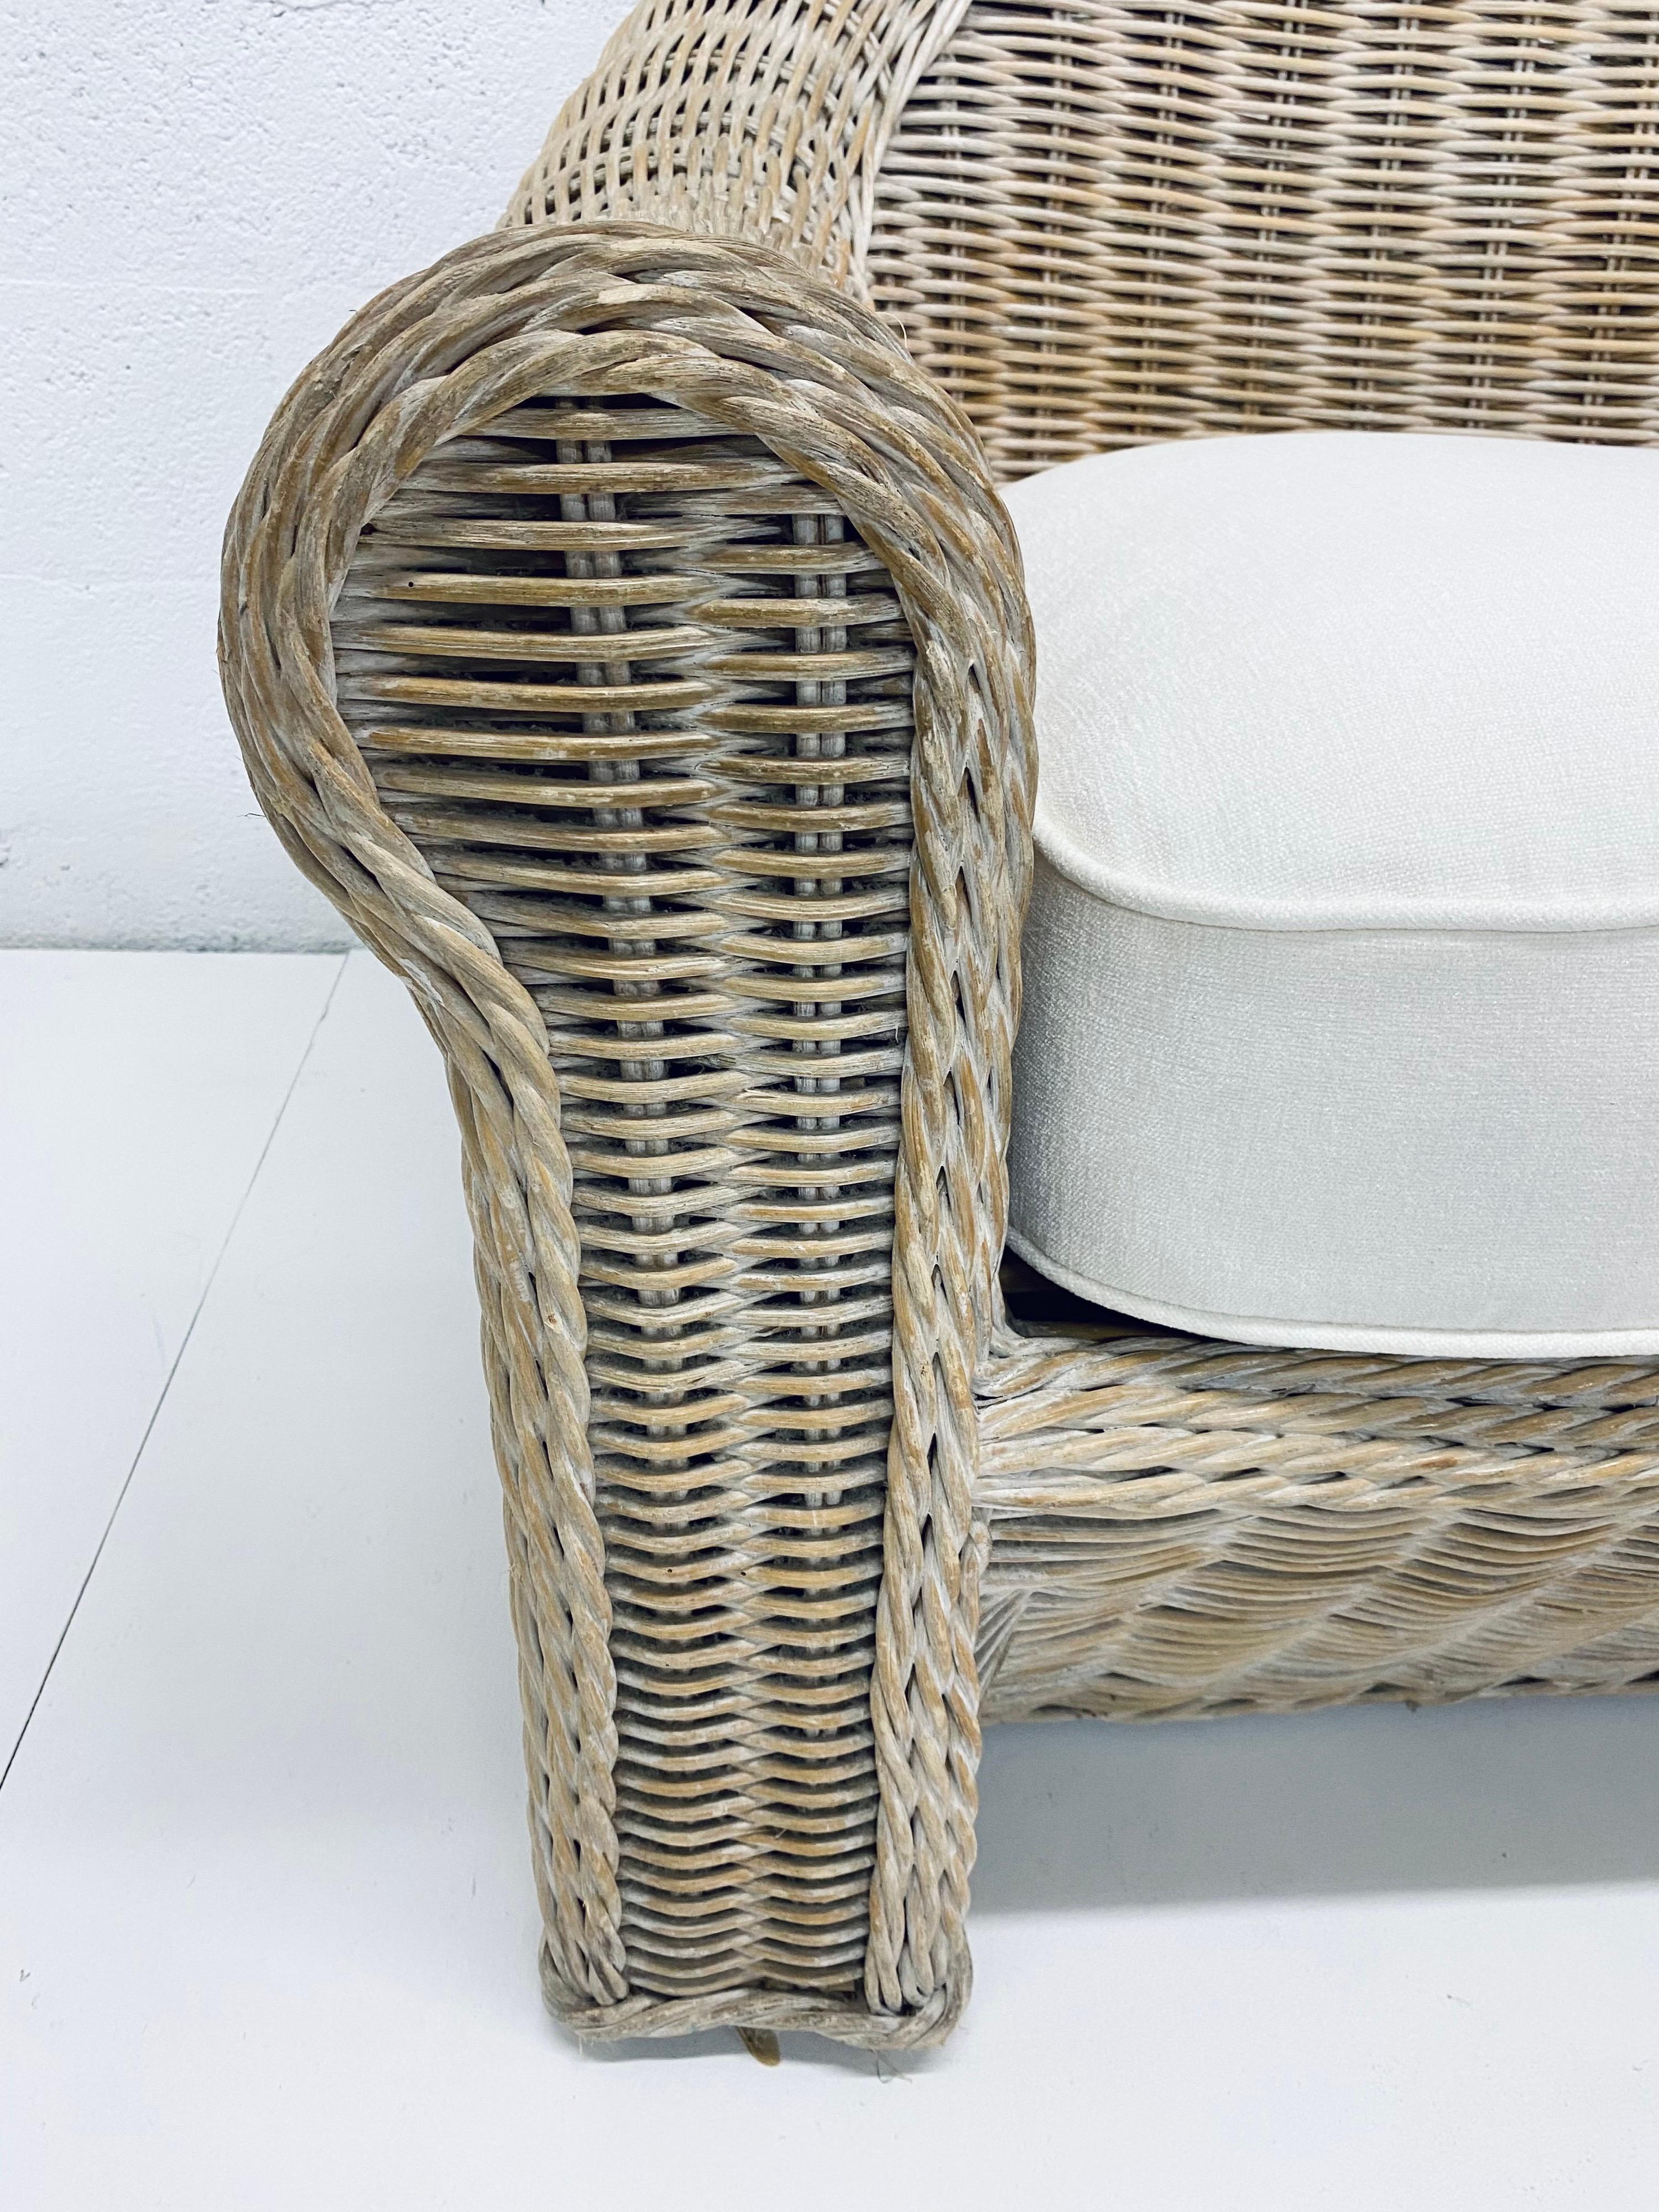 Midcentury Woven Reed Lounge Chair with New White Cotton Linen Upholstery For Sale 5